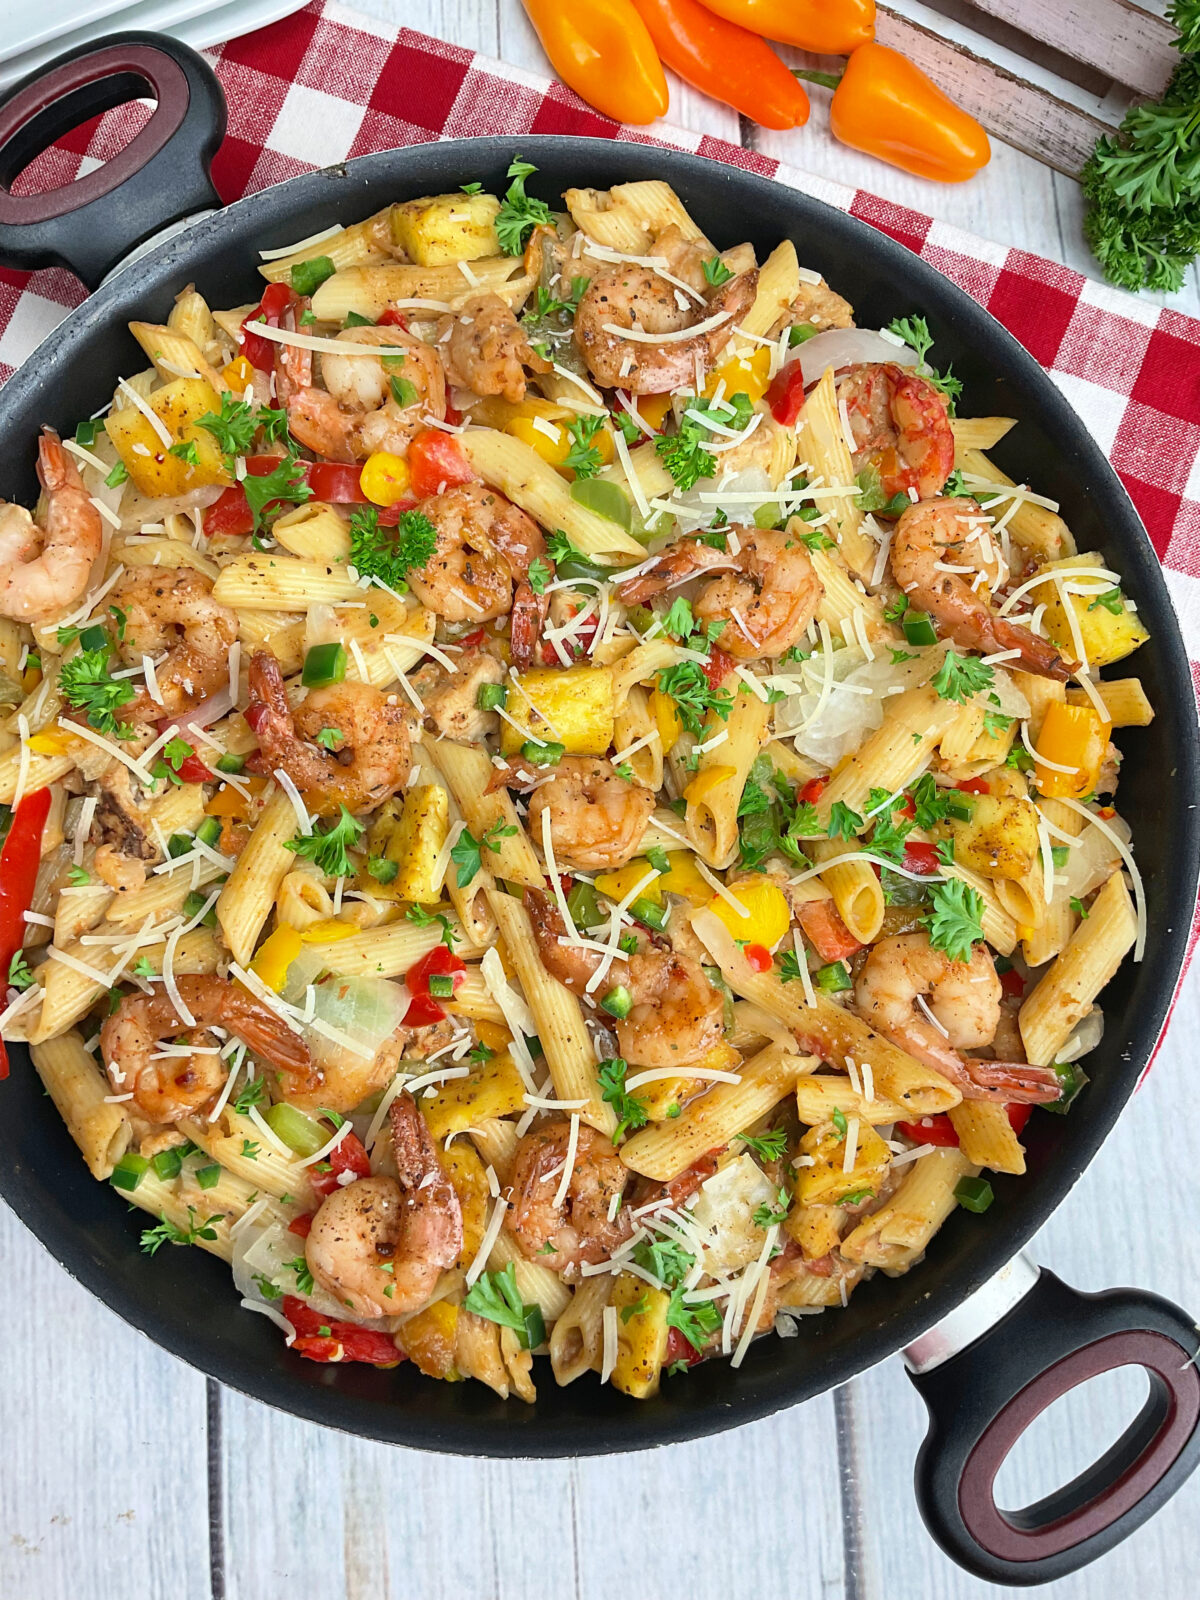 This jerk shrimp pasta recipe is packed with flavor, easy to make, and perfect for any night of the week. Get cooking tonight!